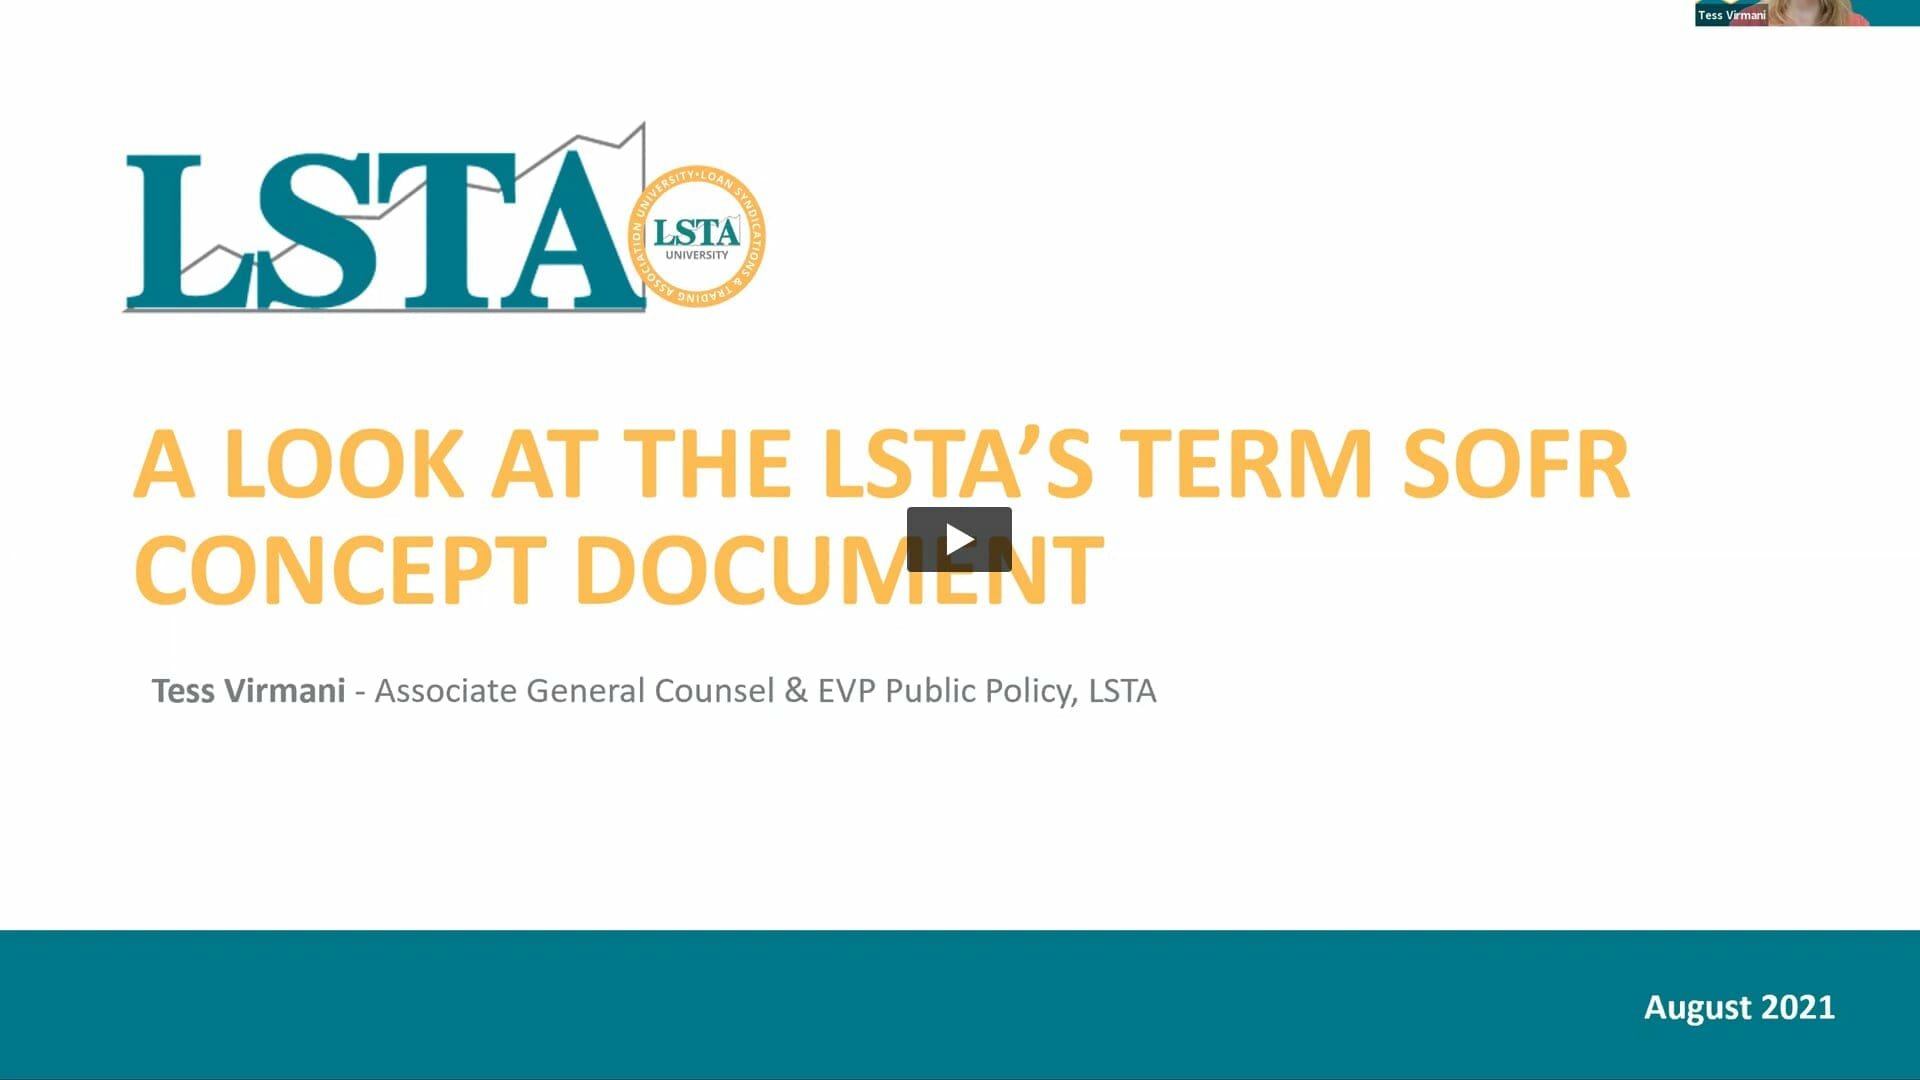 A Look At The LSTA’s Term SOFR Concept Document Podcast